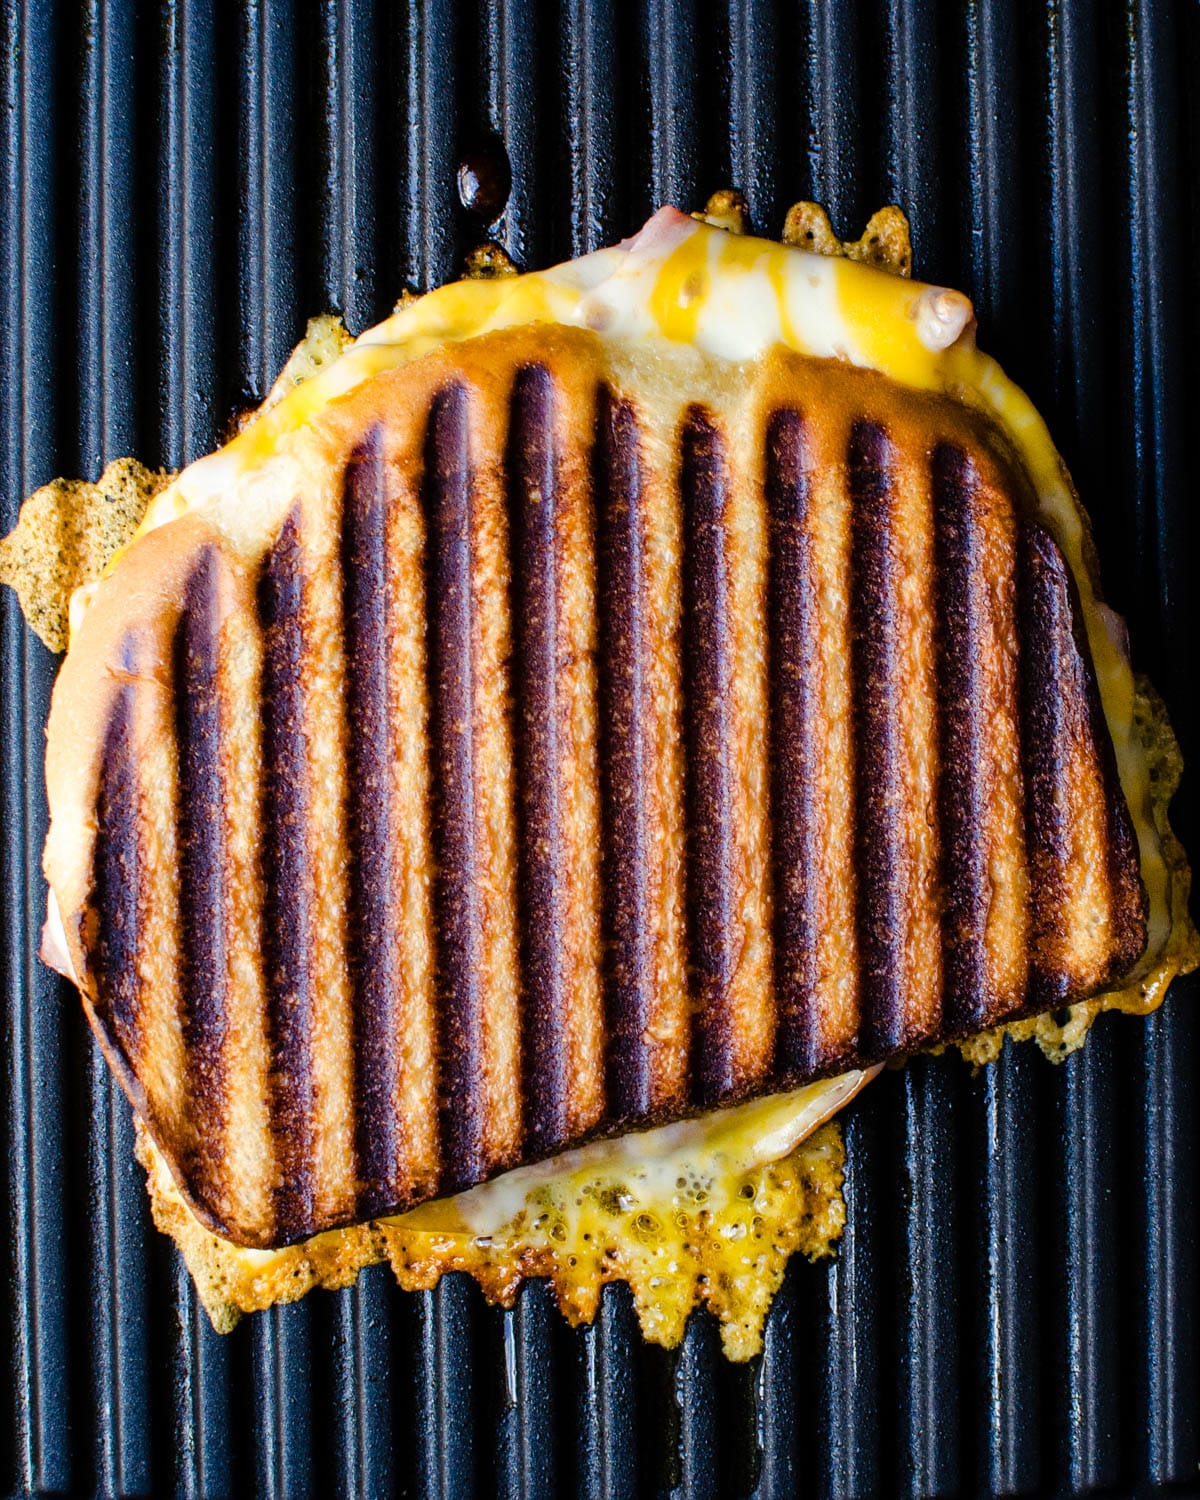 The ham and cheese sandwich on a panini press.